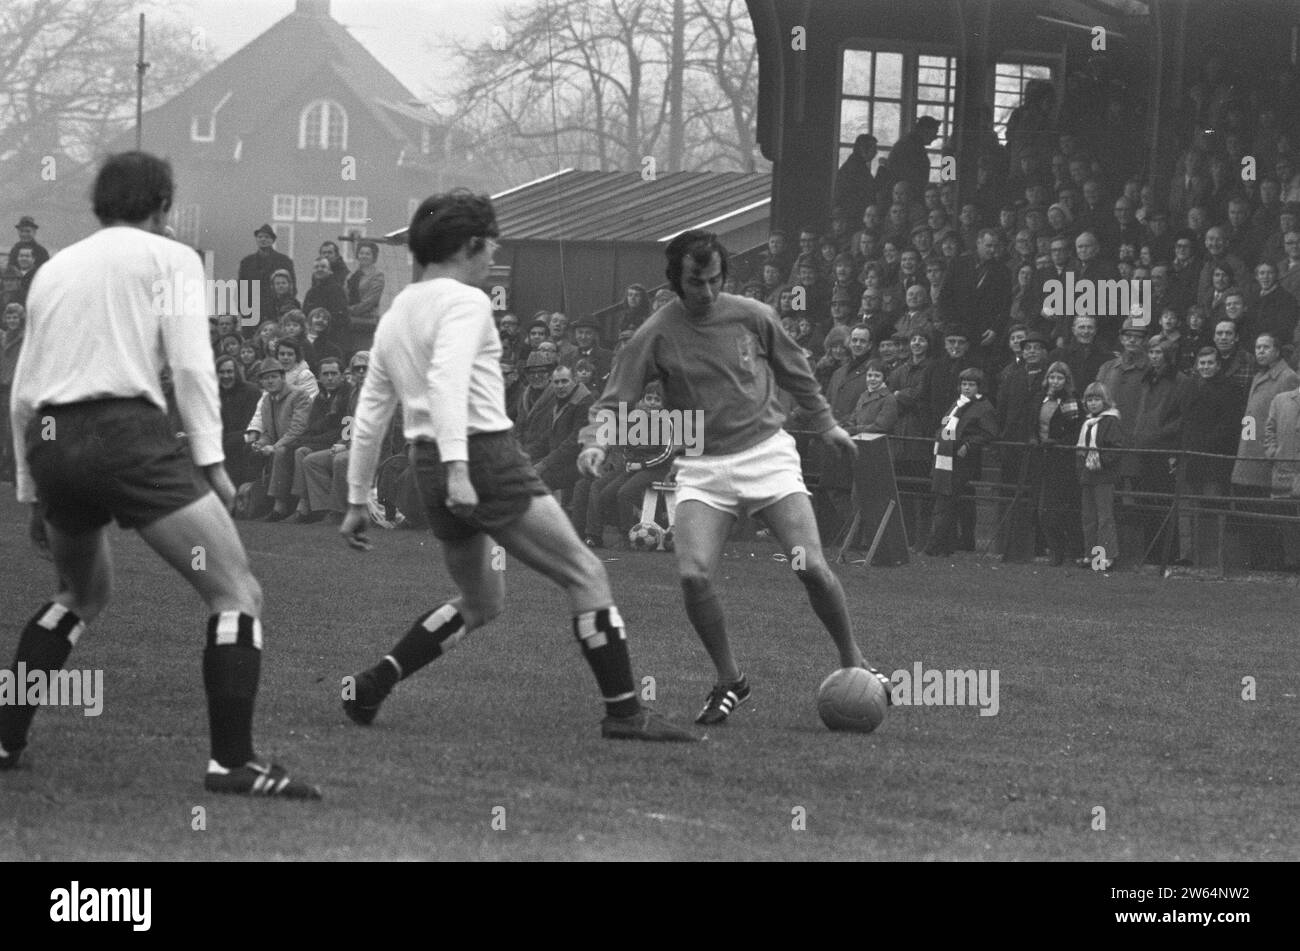 (original caption) KHFC against Old Internationals, Coen Moulijn in action ca. January 1, 1973 Stock Photo